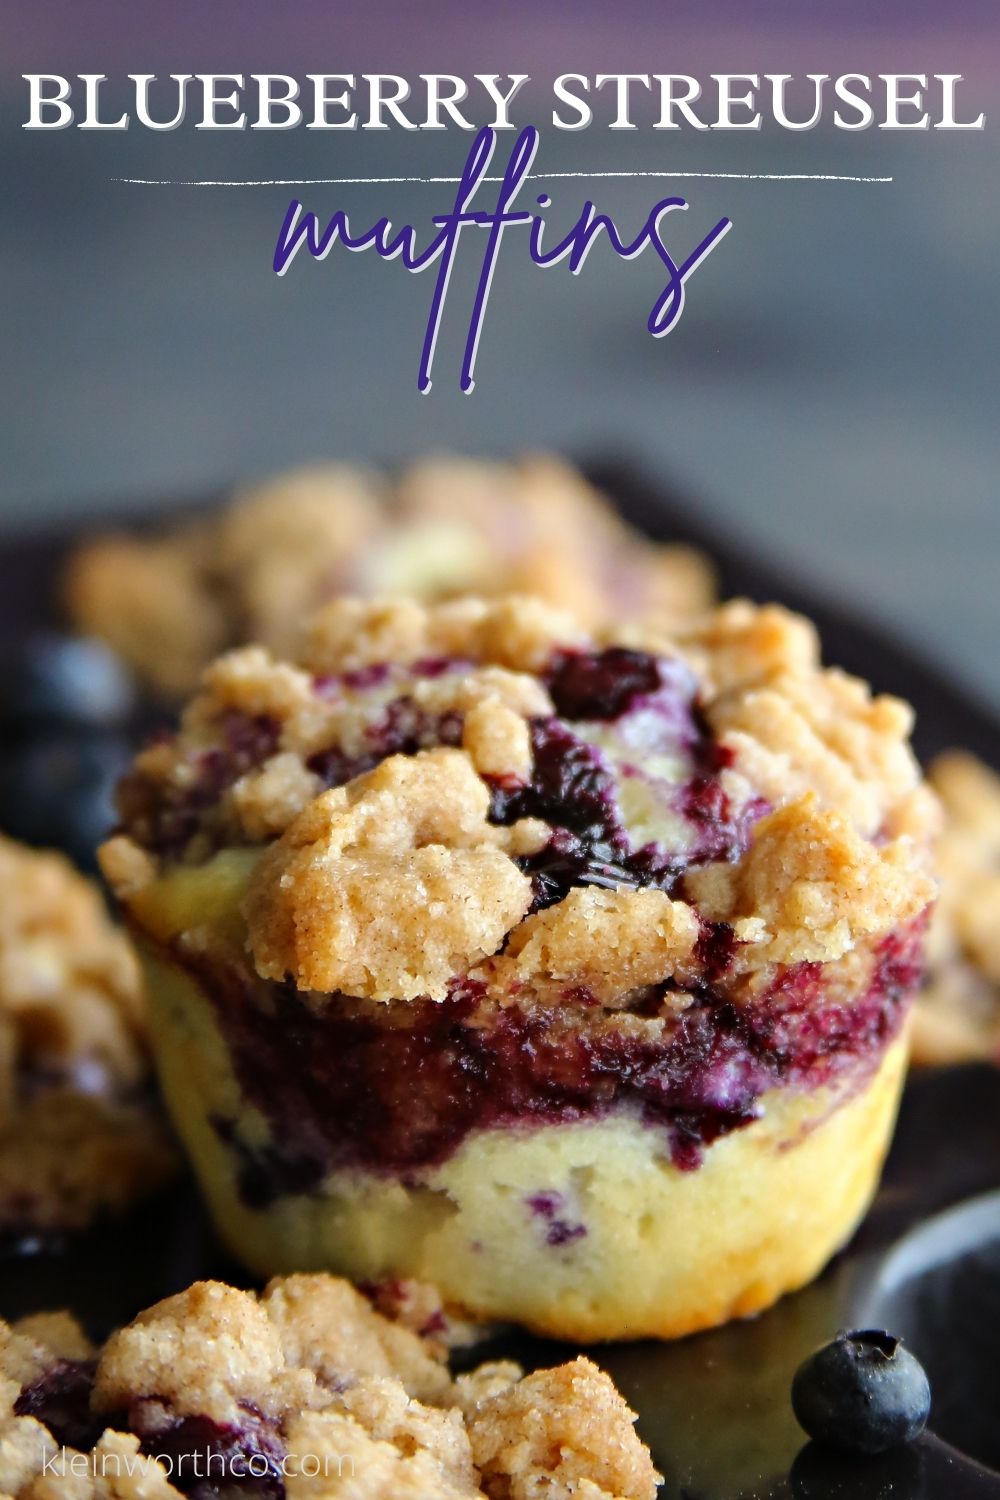 Best Blueberry Streusel Muffins - Taste of the Frontier